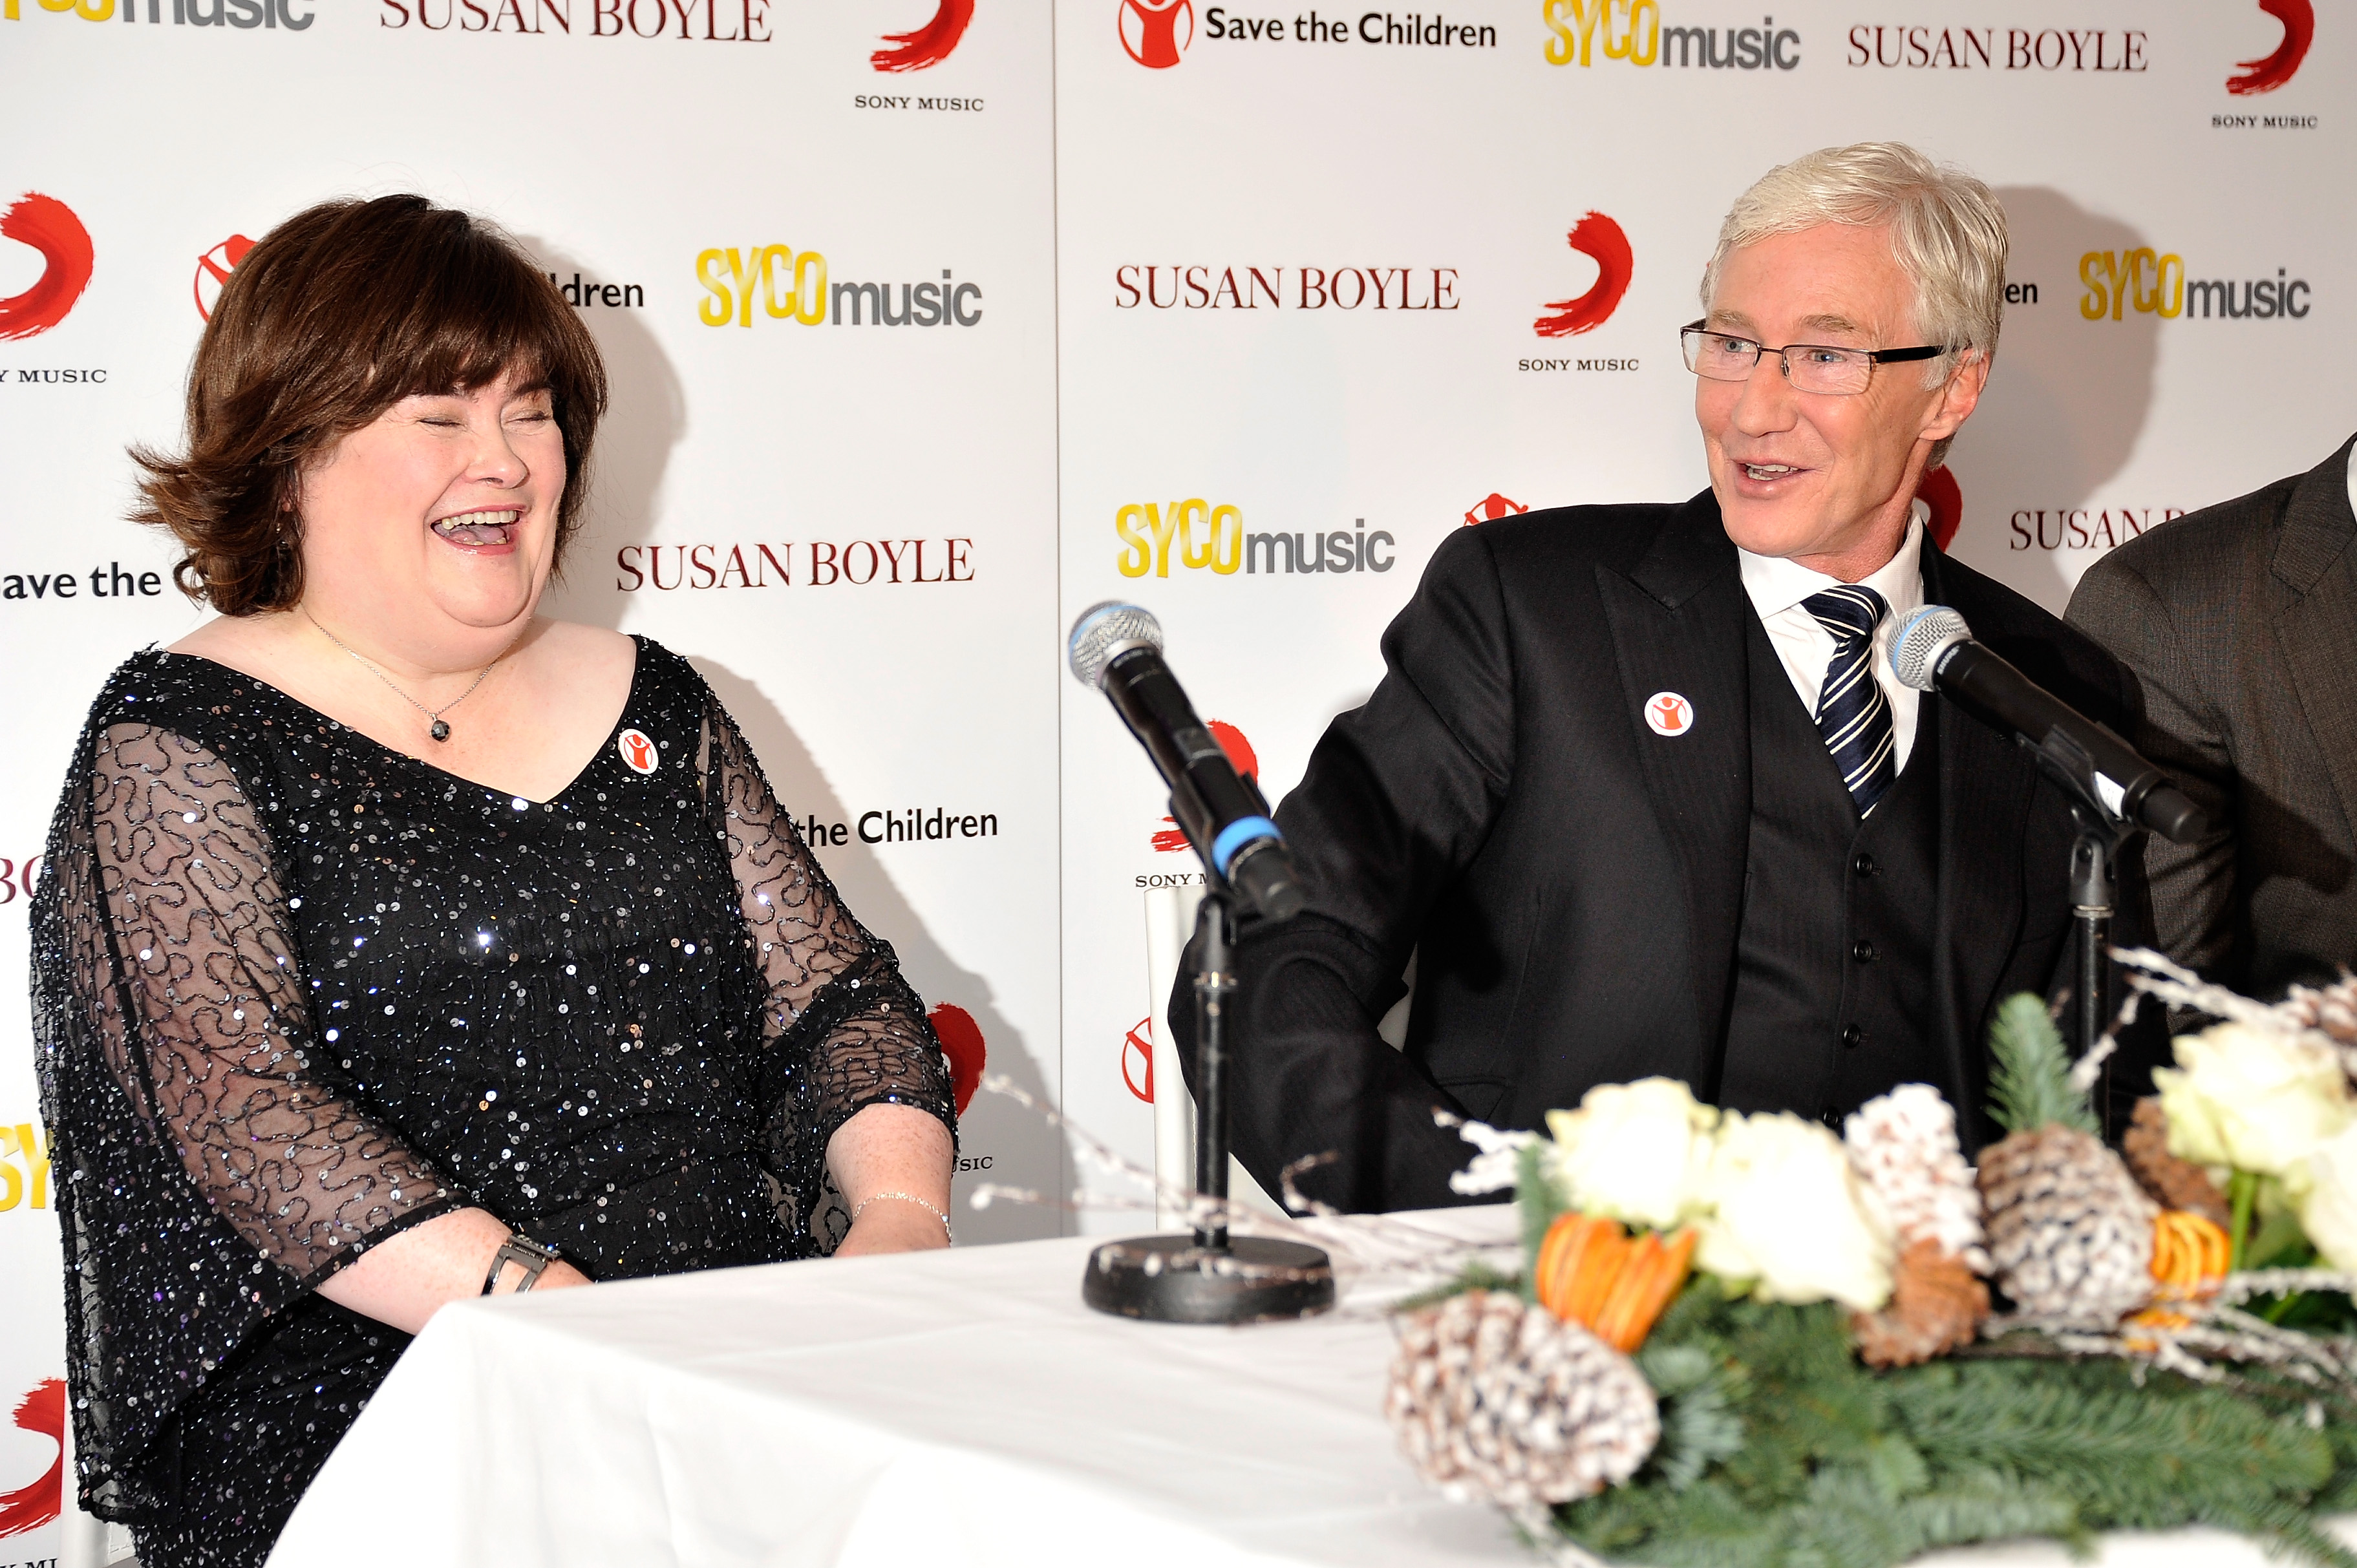 Susan Boyle and Paul O' Grady attend a photocall on October 28, 2013 in London, England | Source: Getty Images